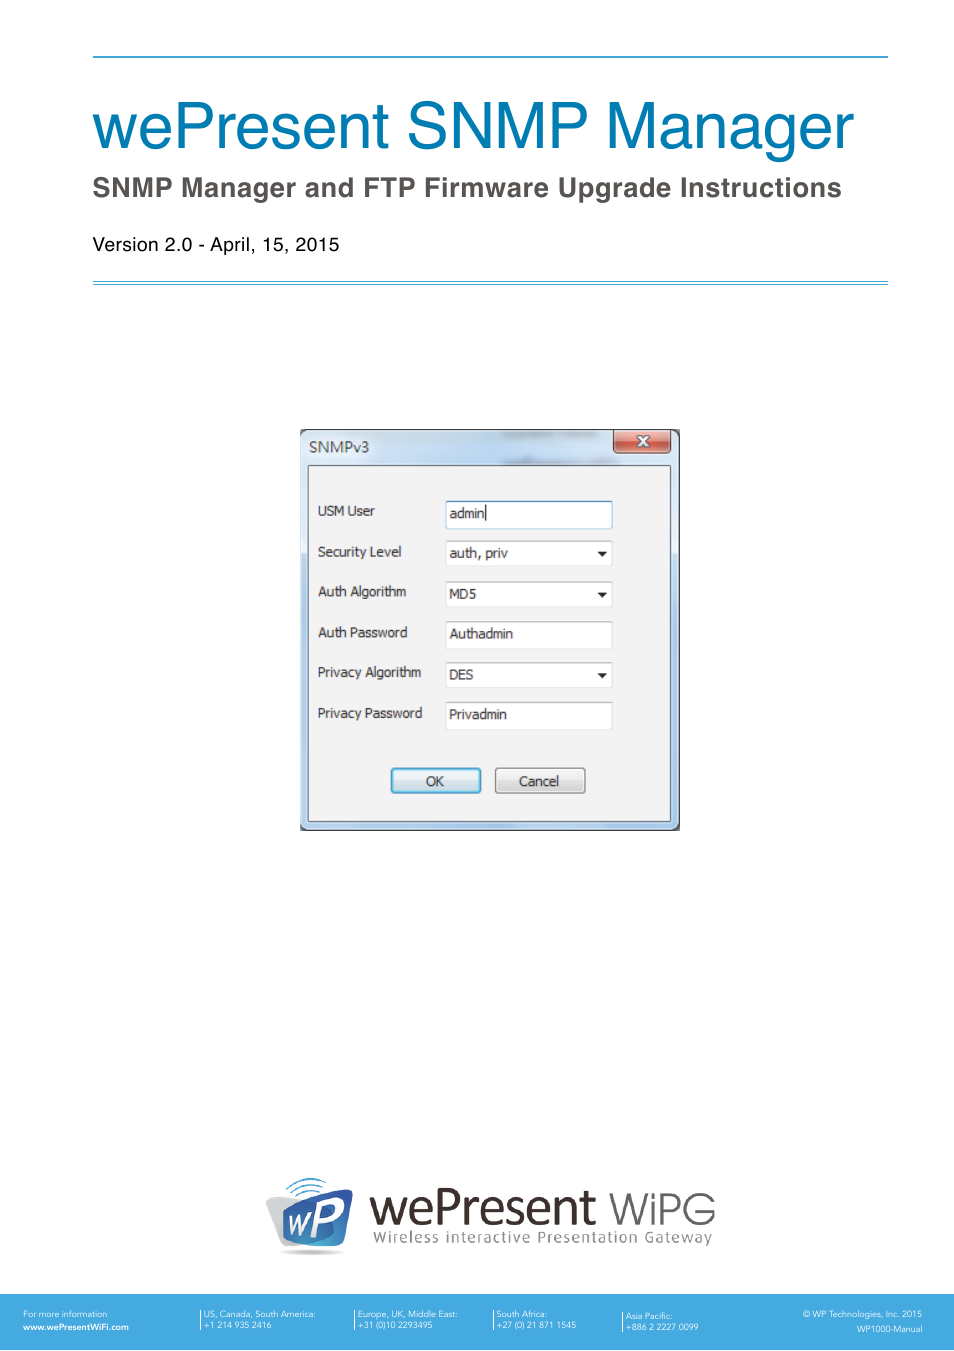 SNMP Manager